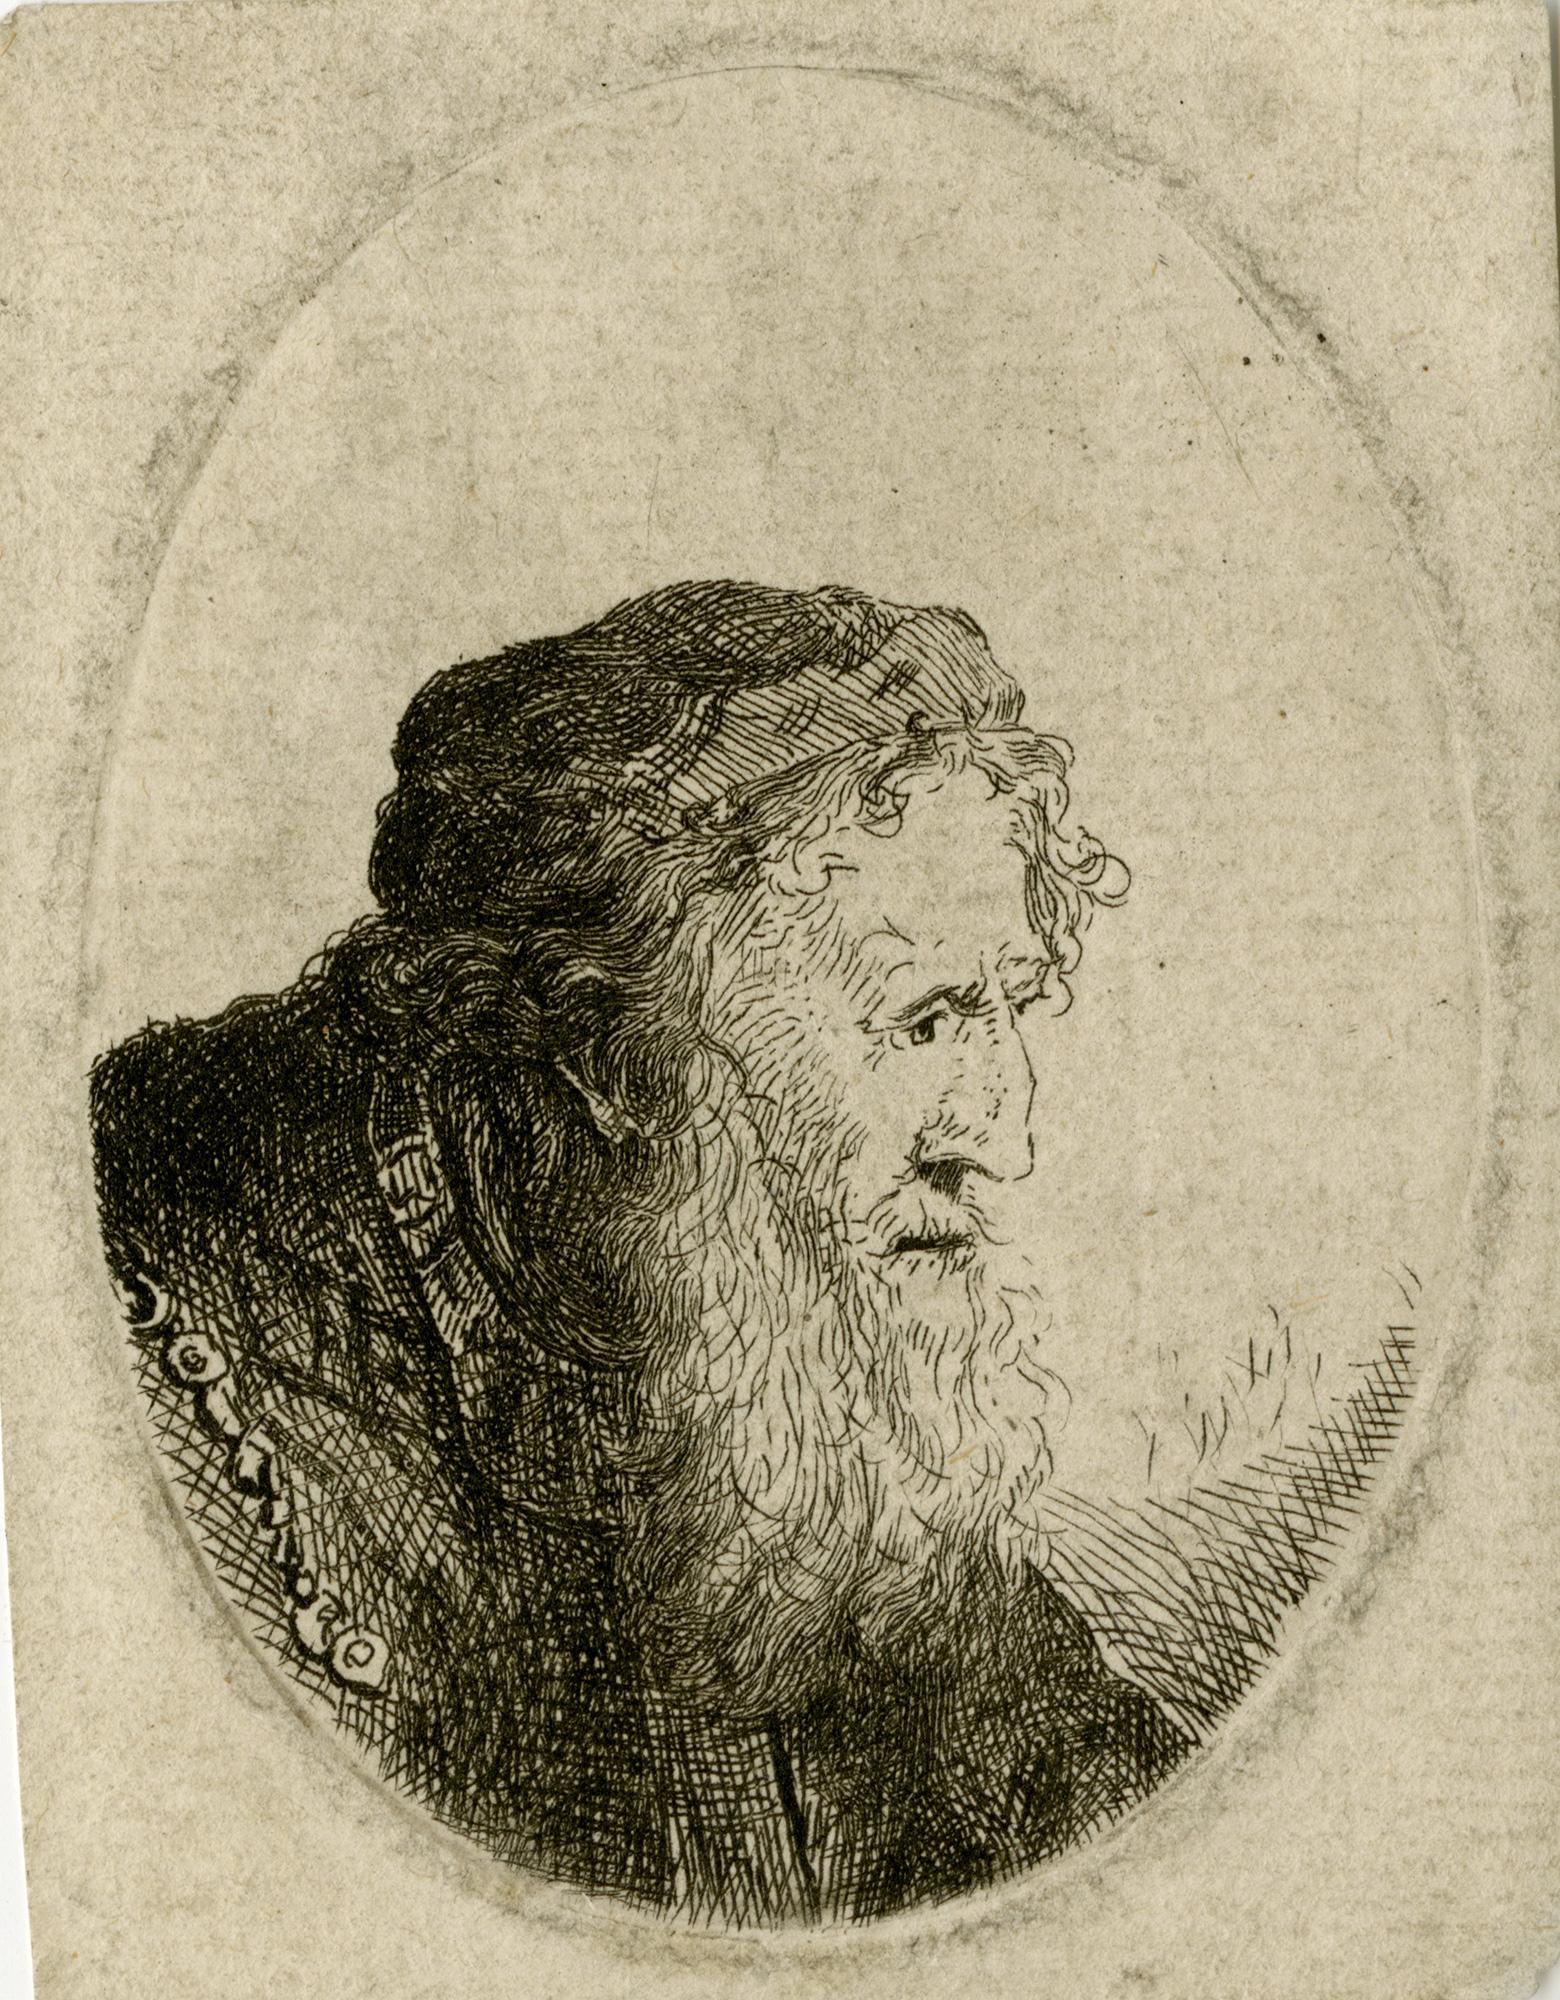 Old man with a long beard and cap - After Rembrandt, copy